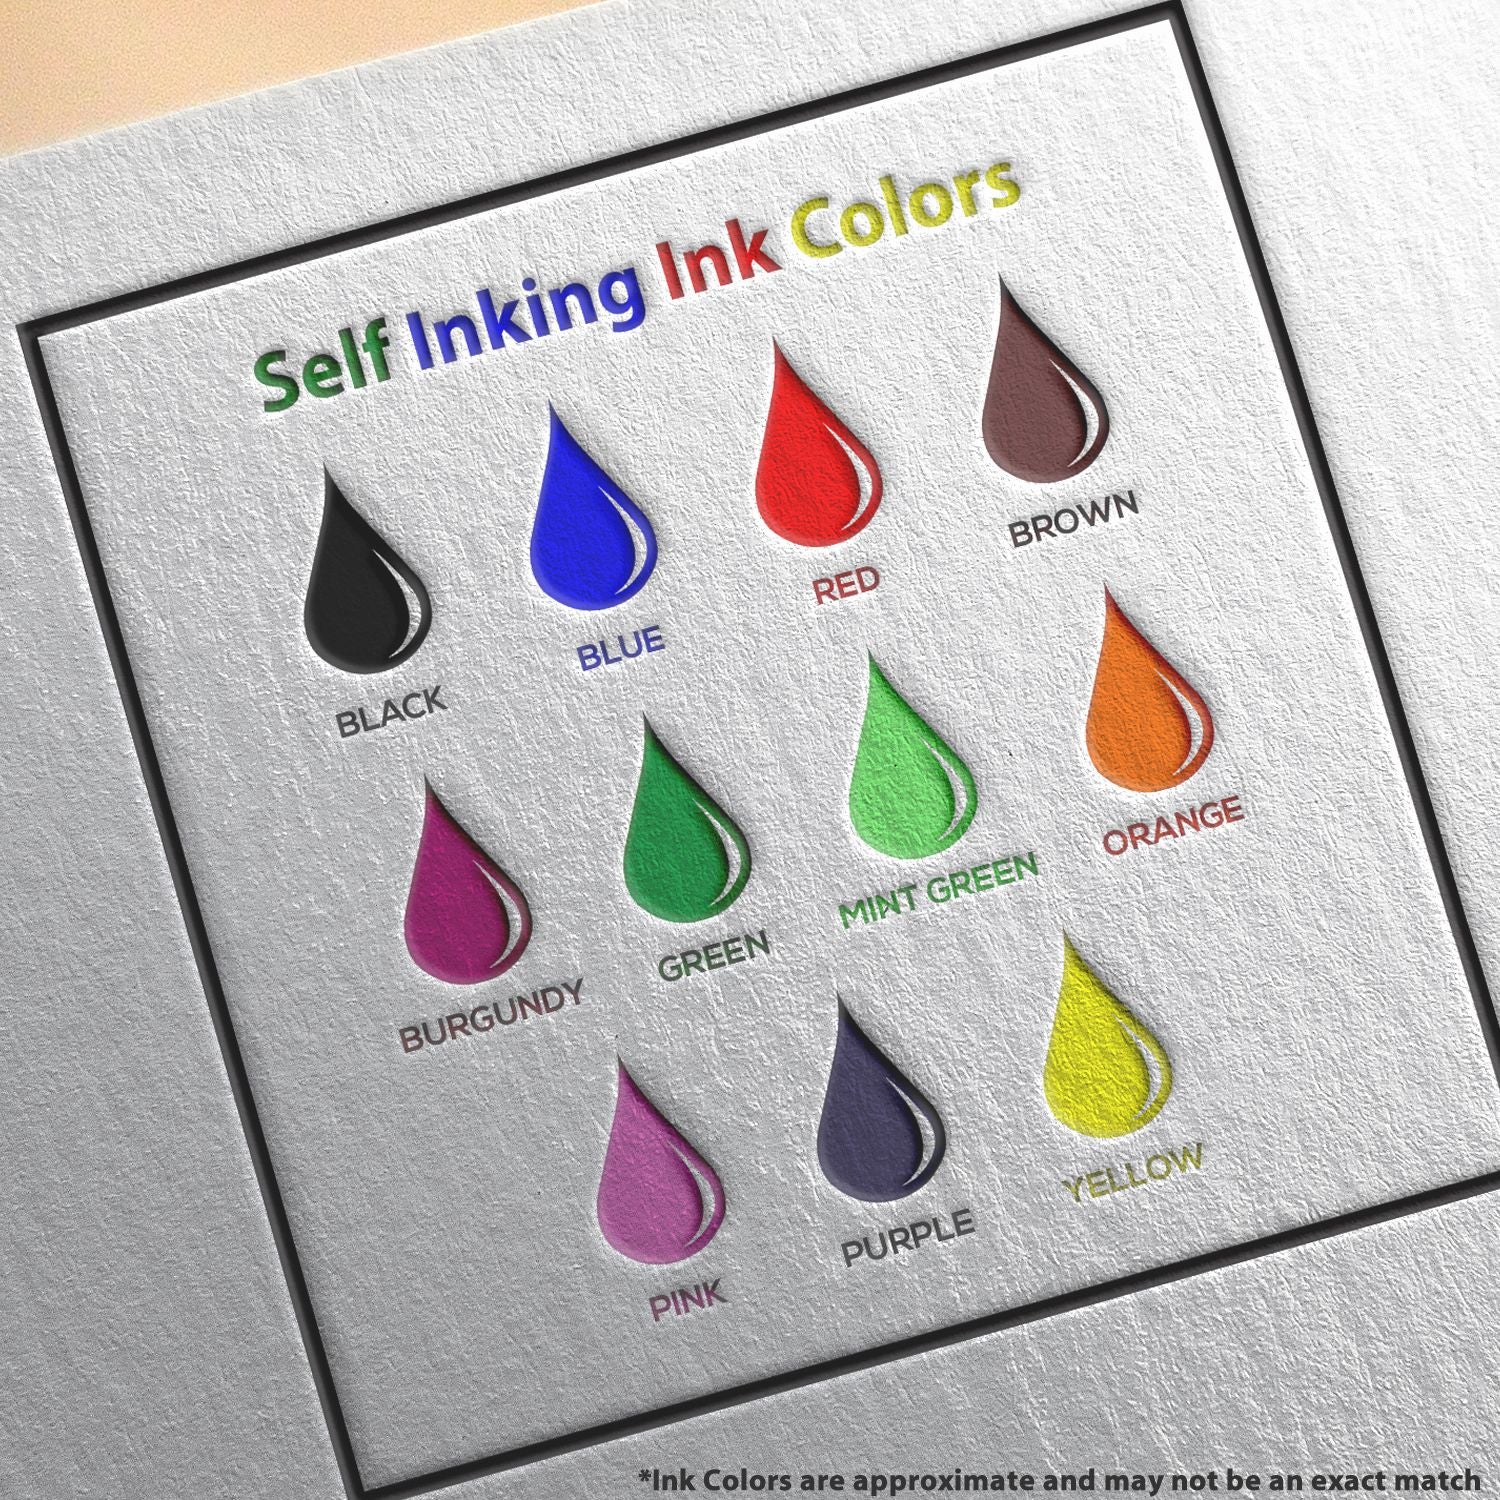 A picture showing the different ink colors or hues available for the Self-Inking Indiana Landscape Architect Stamp product.